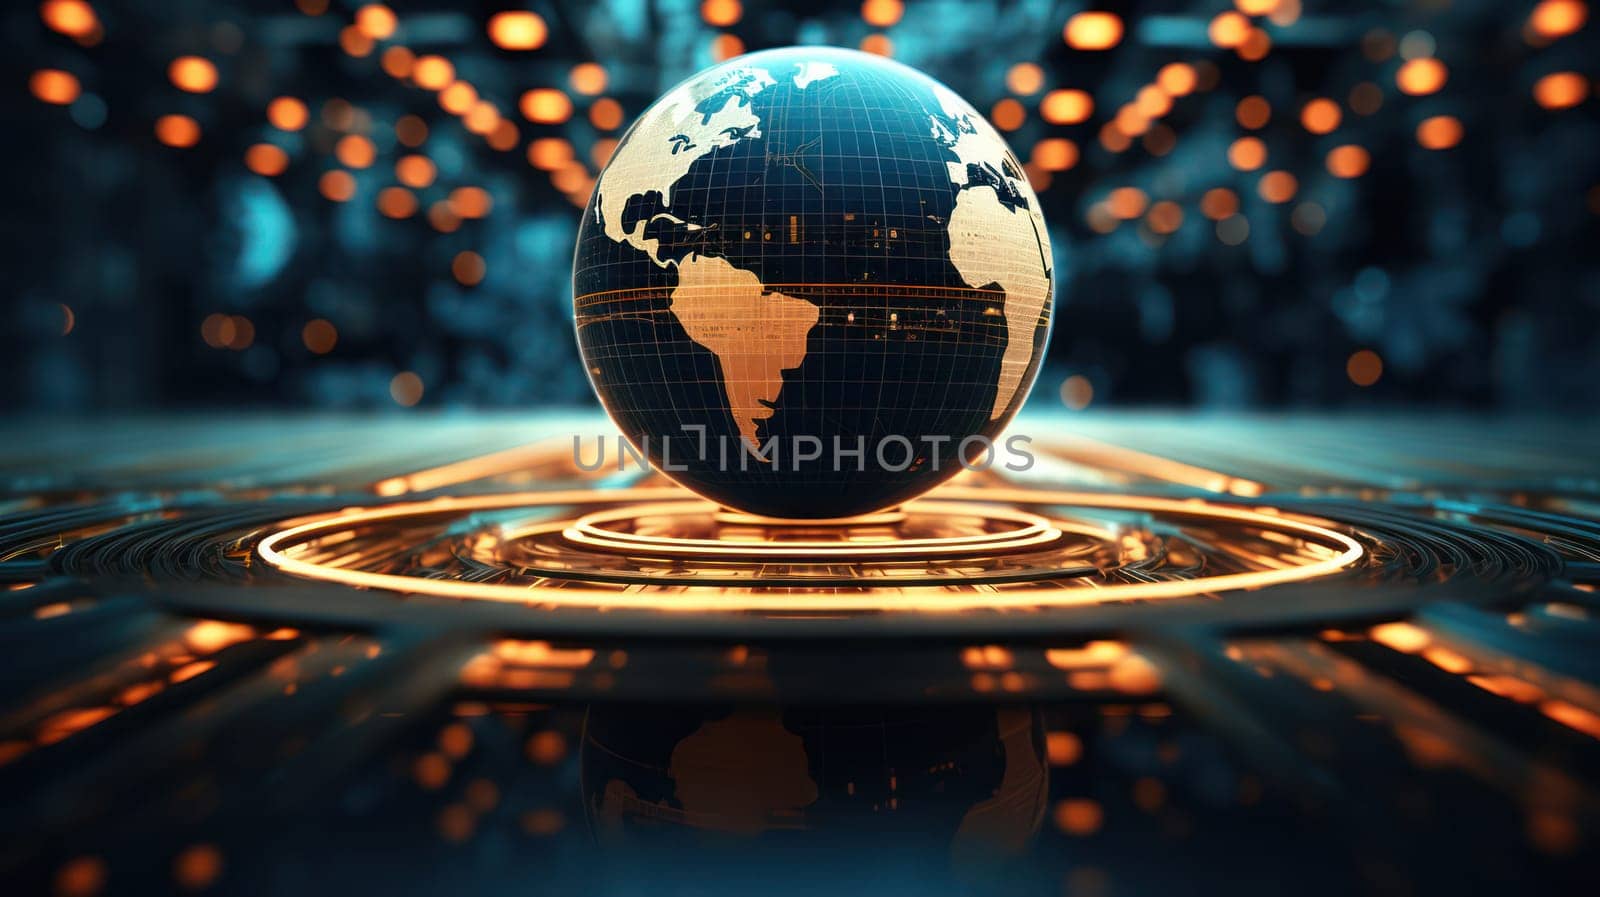 Connecting Continents: Global Sphere of Technology on a Blue Planet by Vichizh